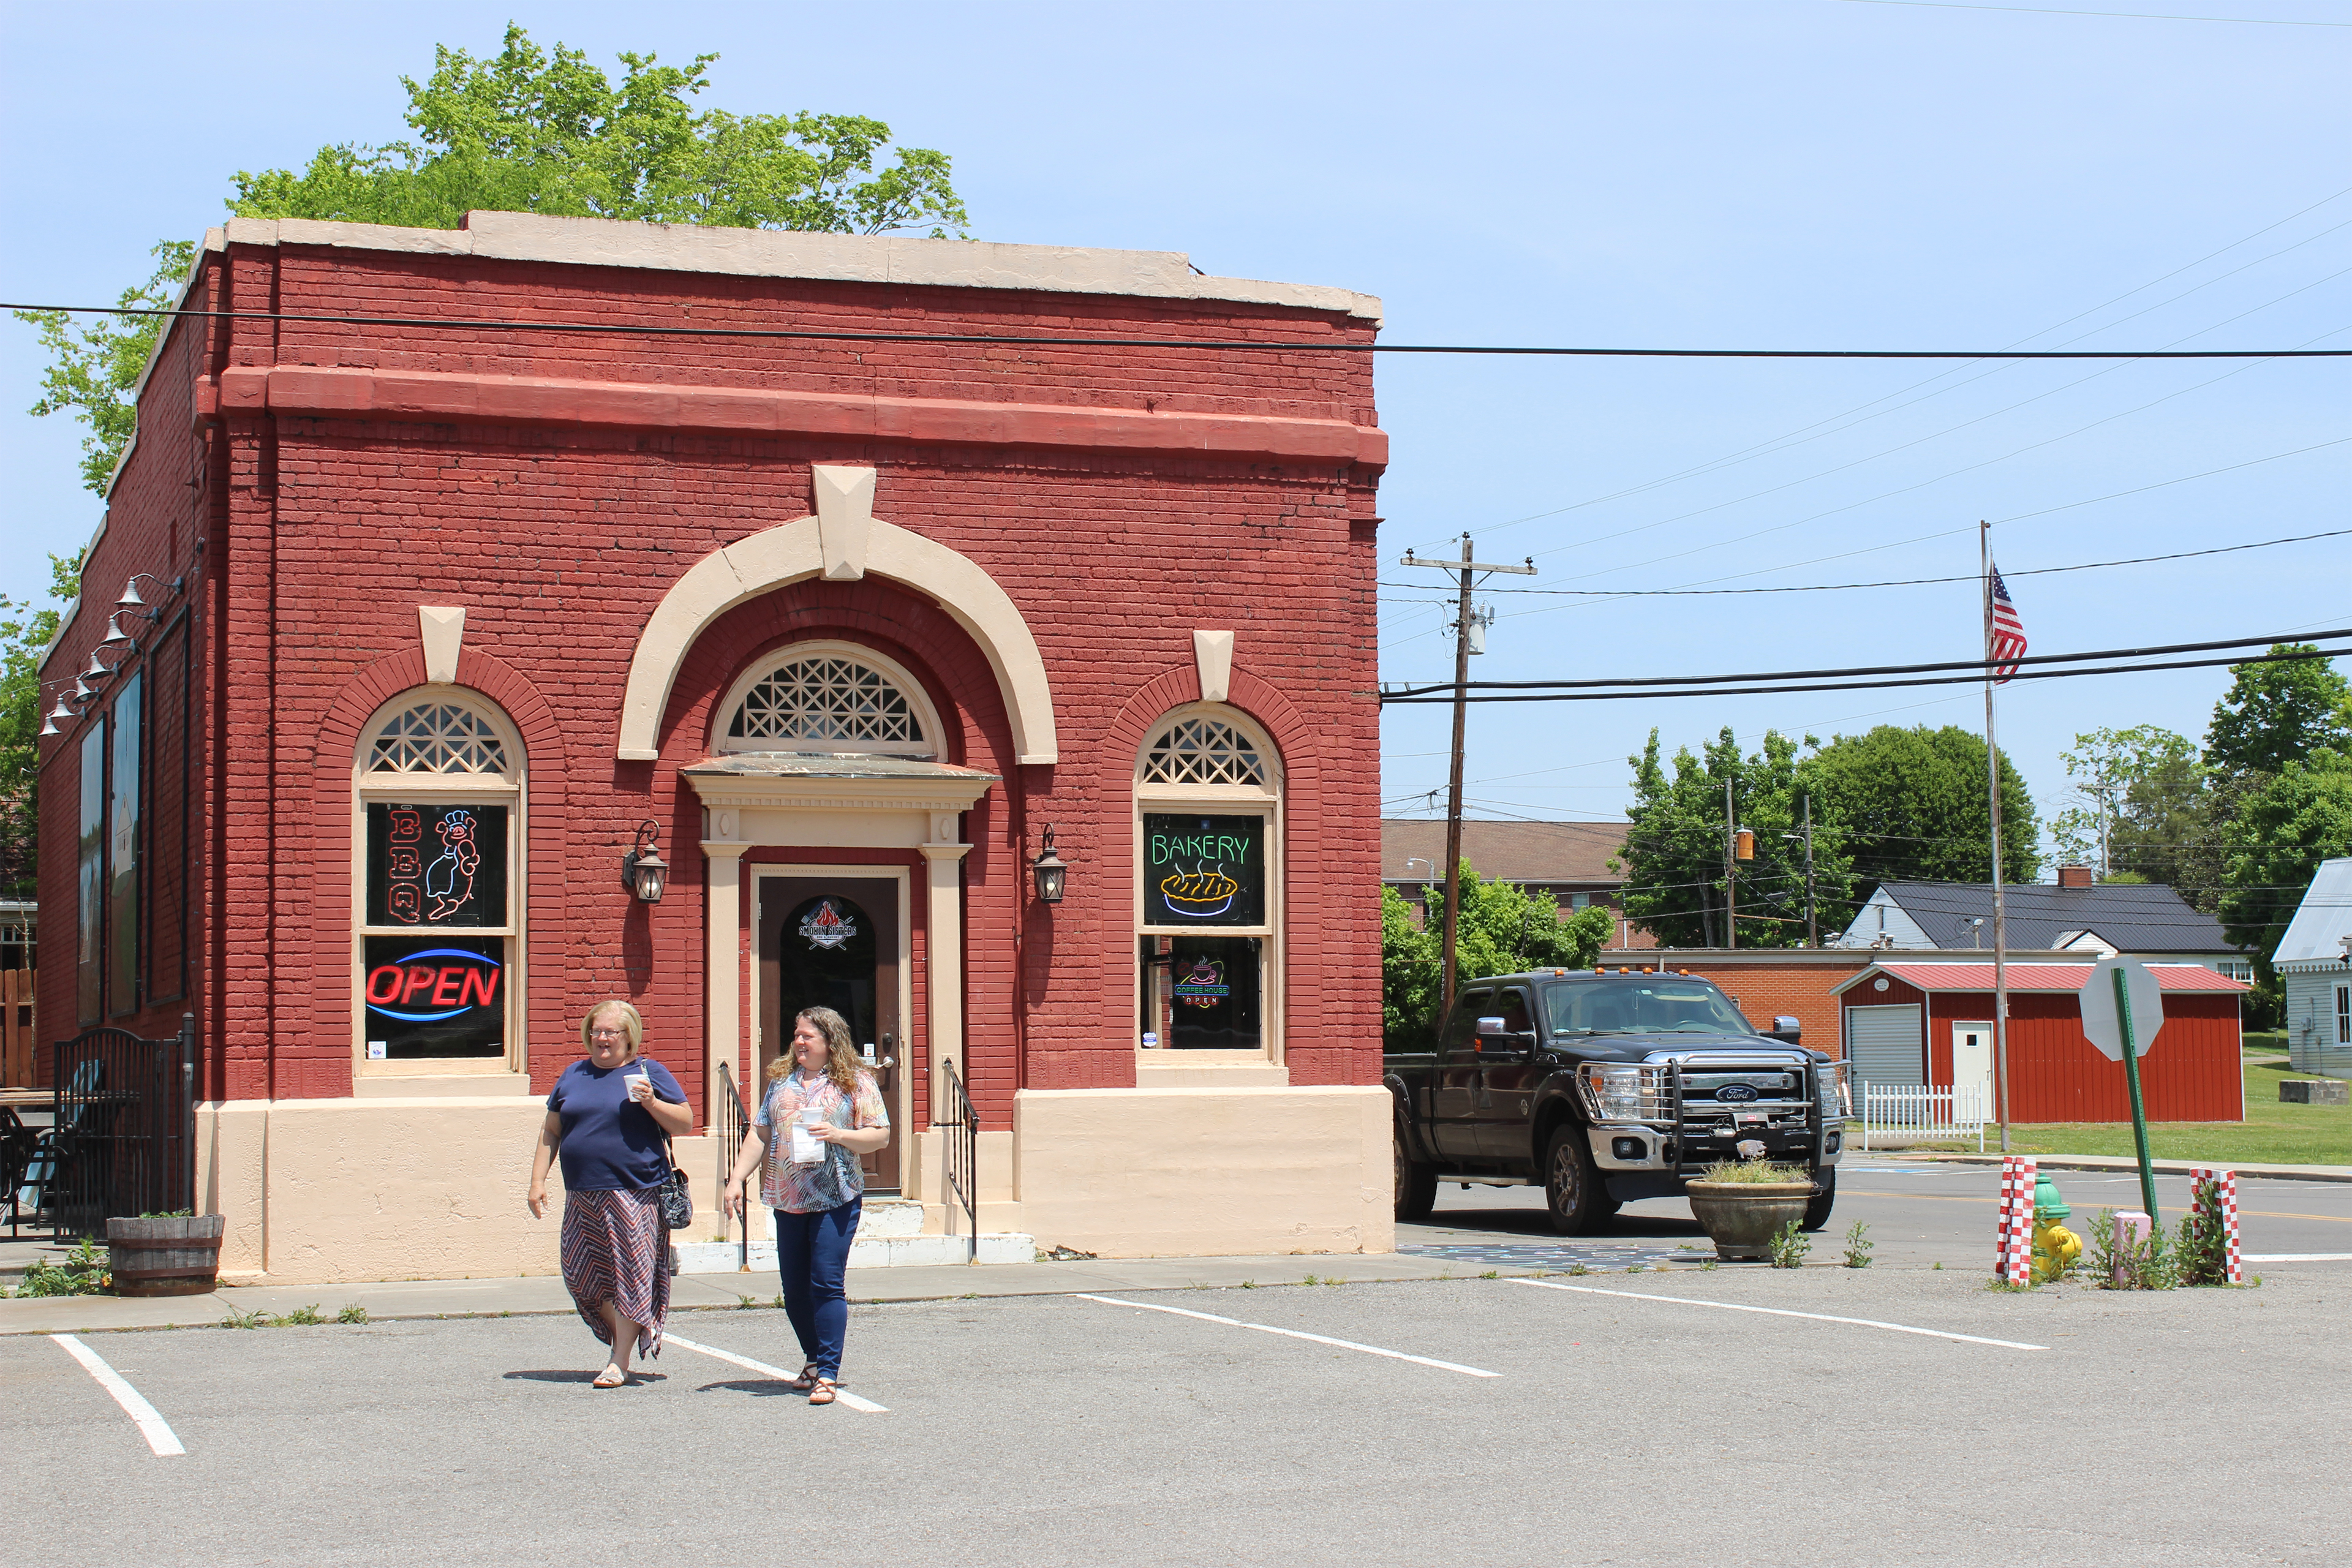 Two people walk past a building on a sunny day in Decatur, Tennessee.